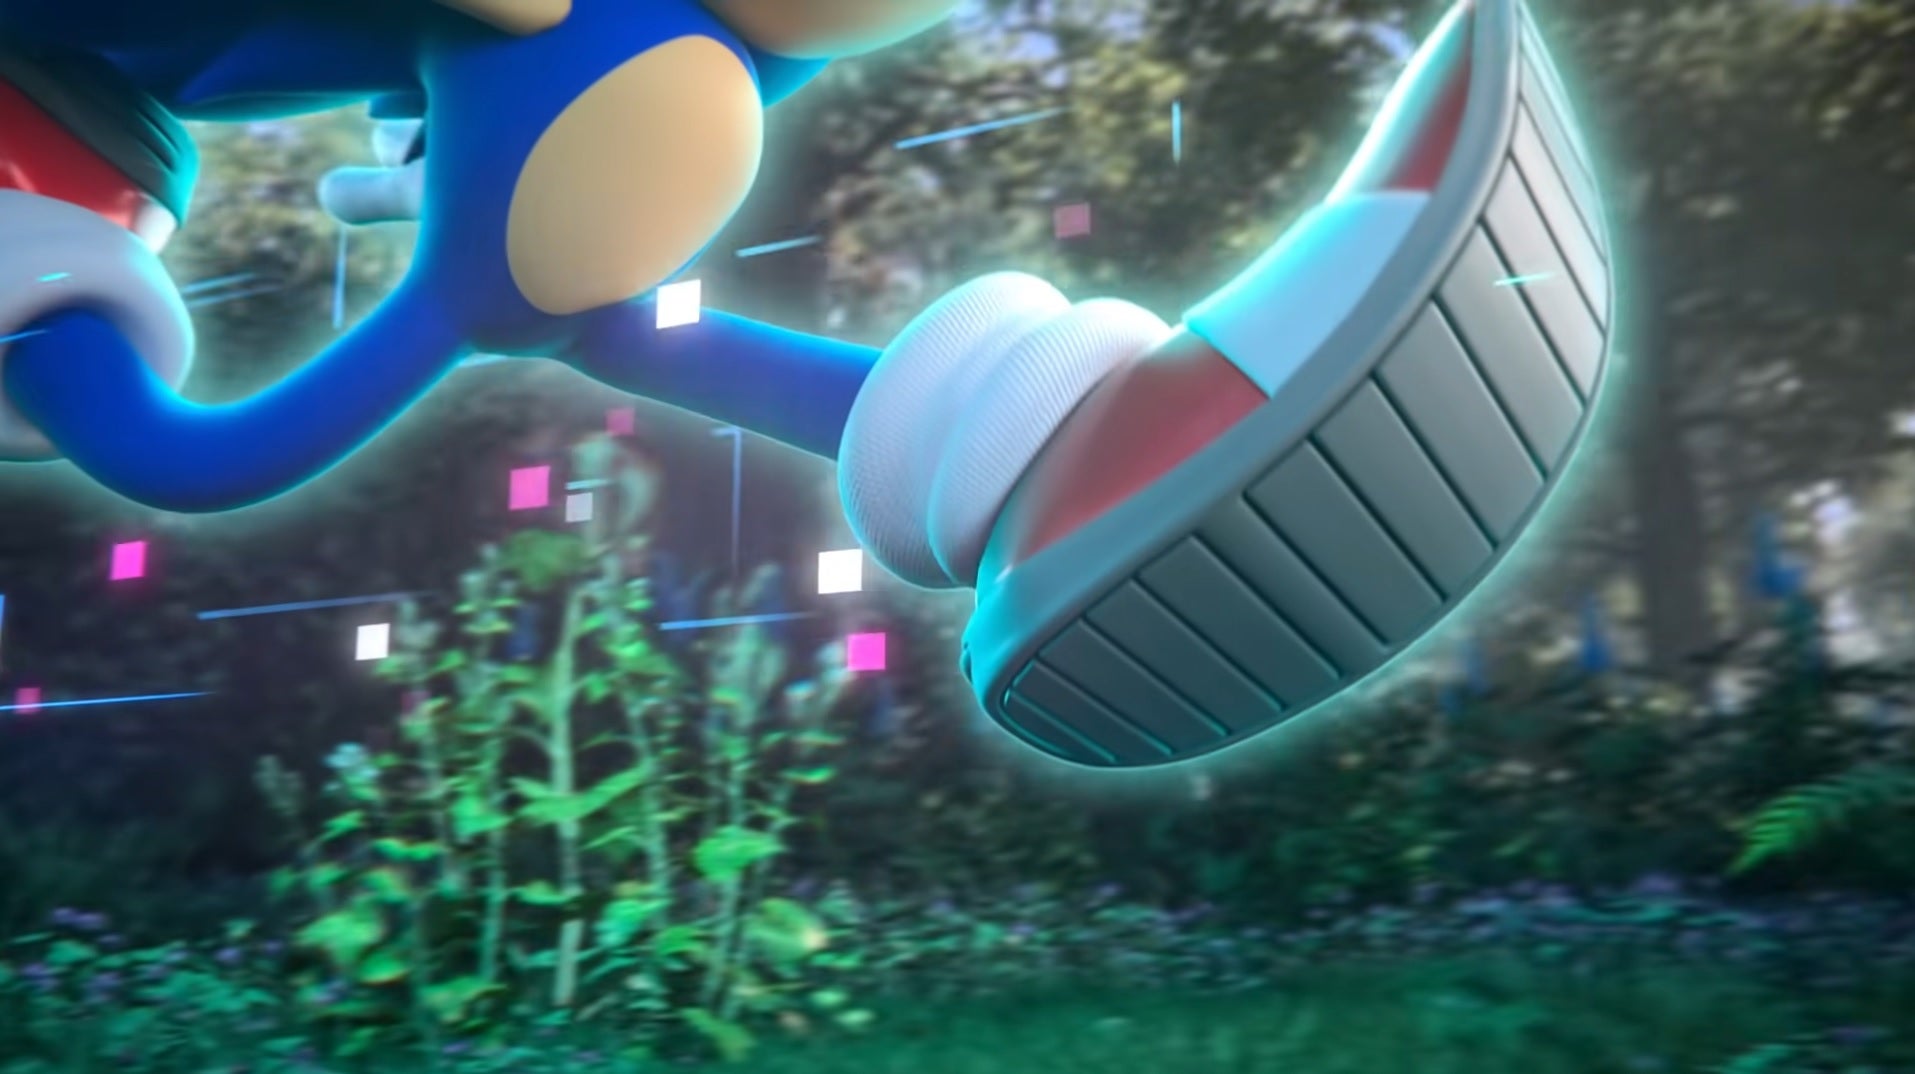 Sonic teaser for 2022 game - Animated 3D Sonic's torso and shoes as visible surrounded by digital-looking purple artifacts in a mostly realistic-looking forest.